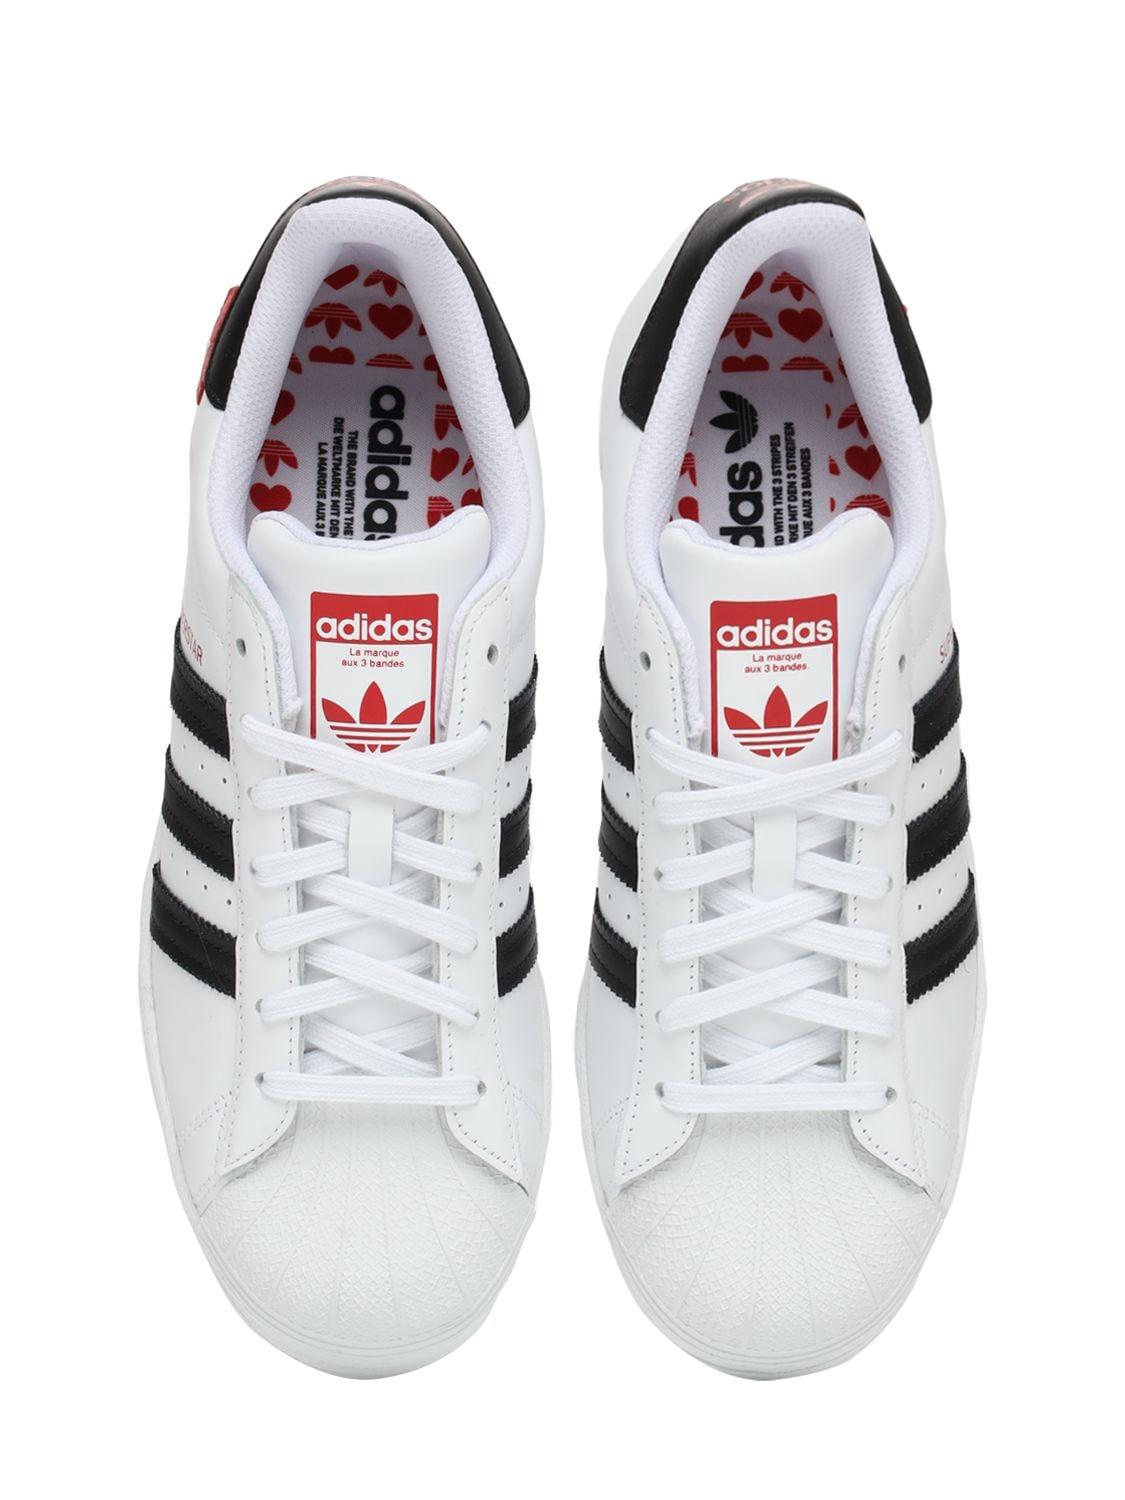 adidas Originals Leather Valentines Day Superstar Sneakers in White | Lyst